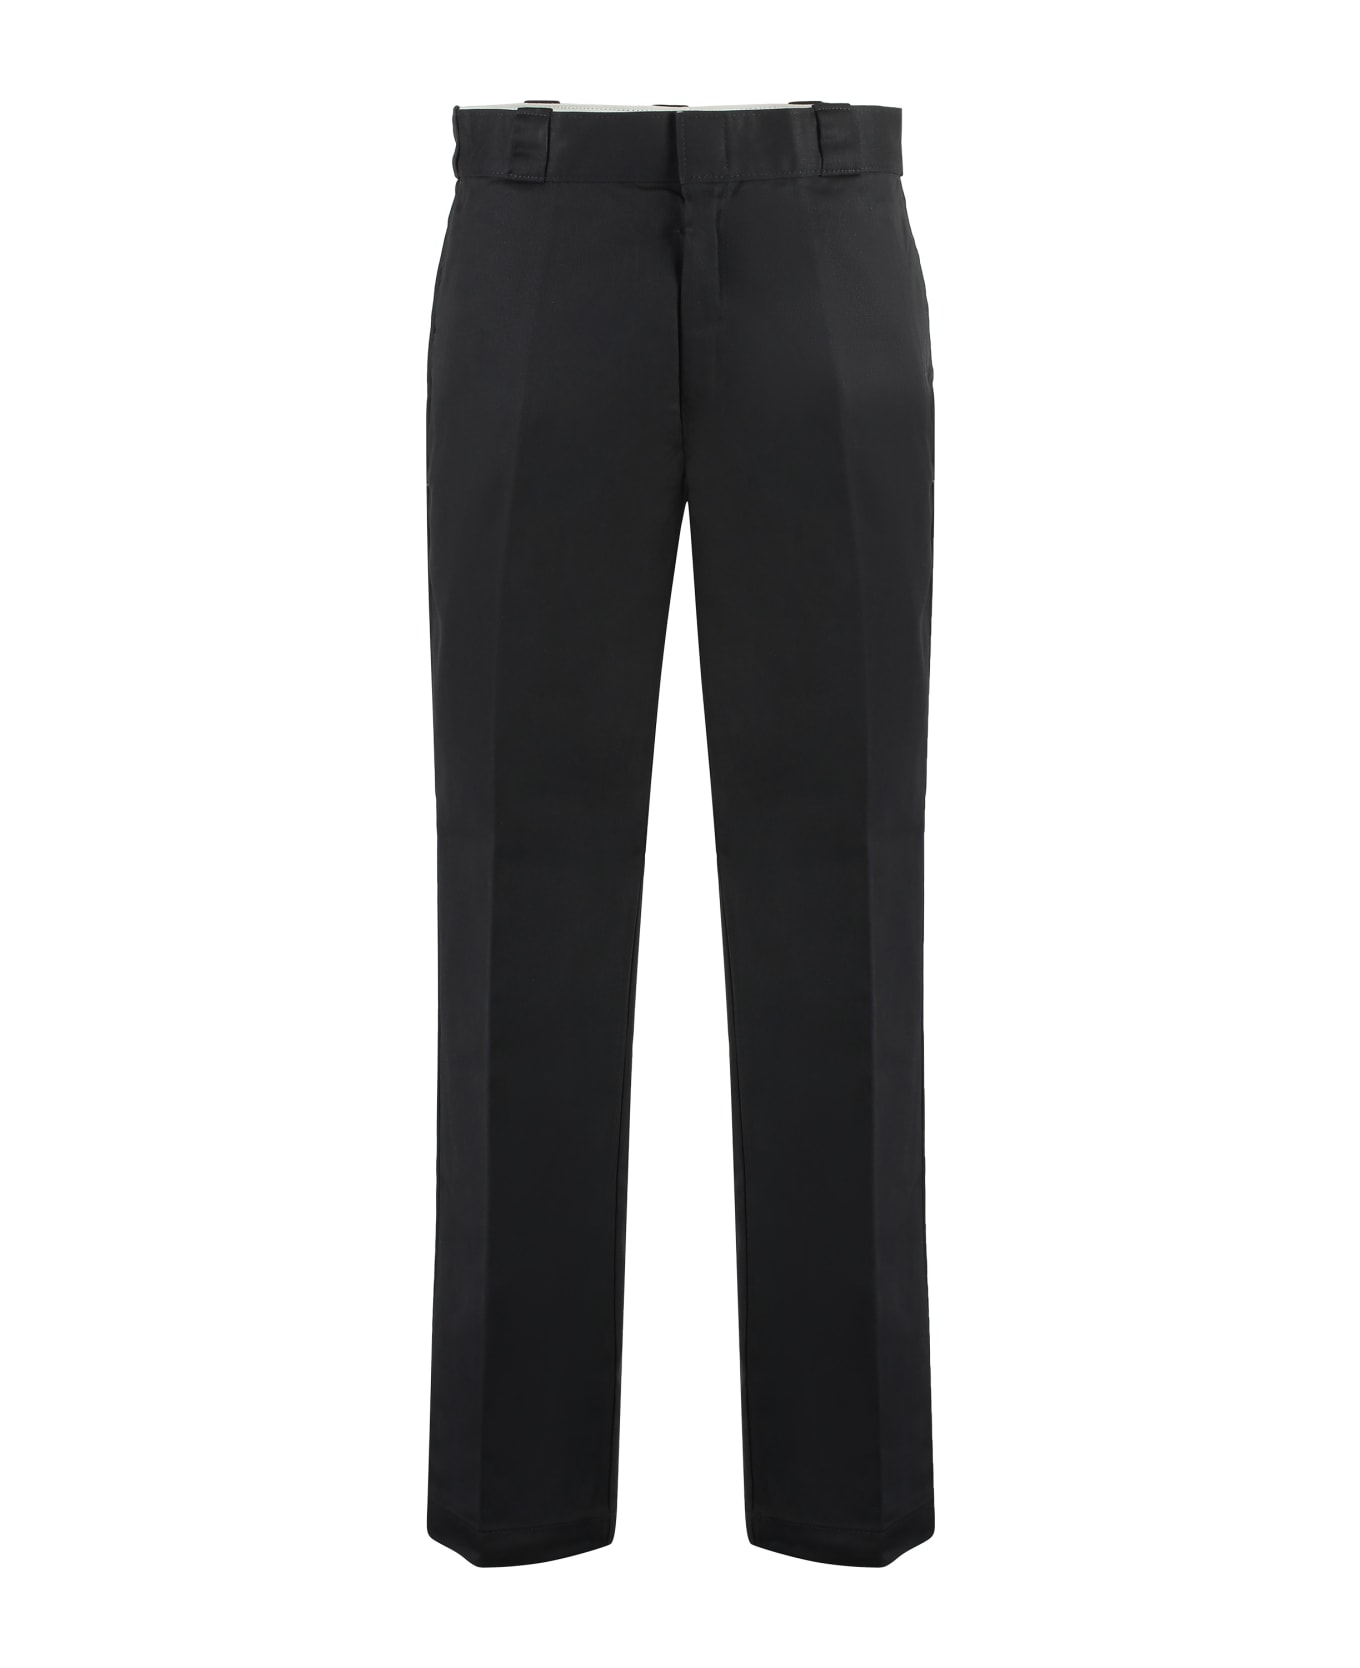 Dickies 874 Cotton Blend Trousers - black